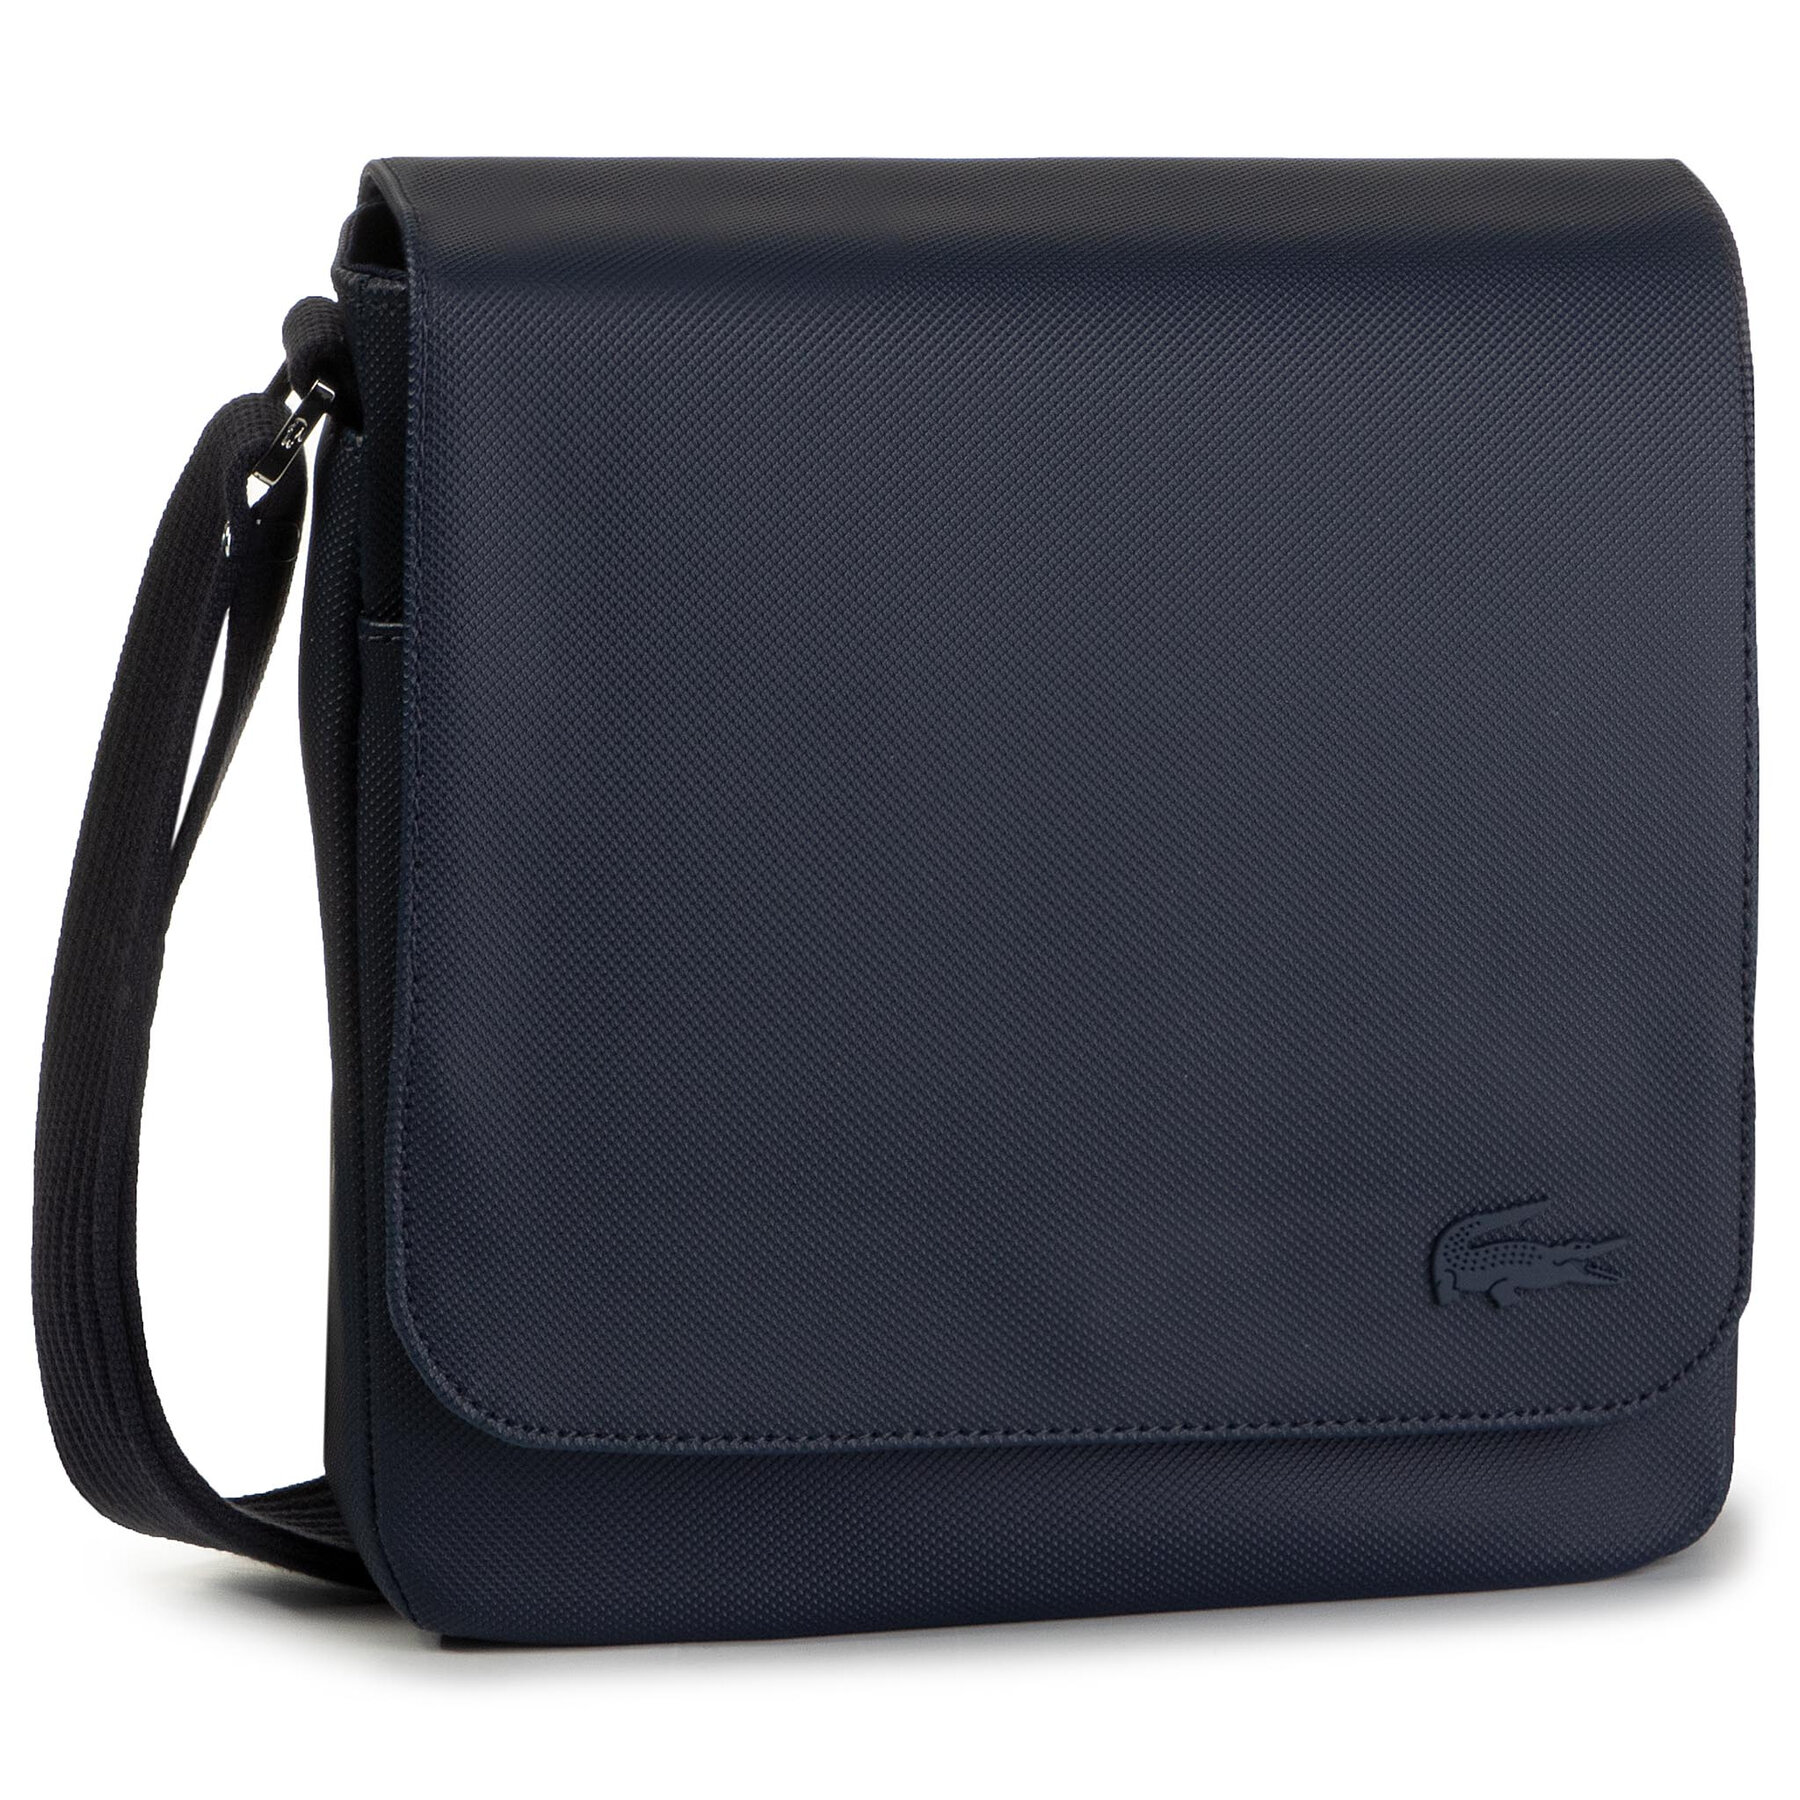 Geantă crossover Lacoste Flap Crossover Bag NH2341HC Peacoat 021 021 imagine 2022 reducere